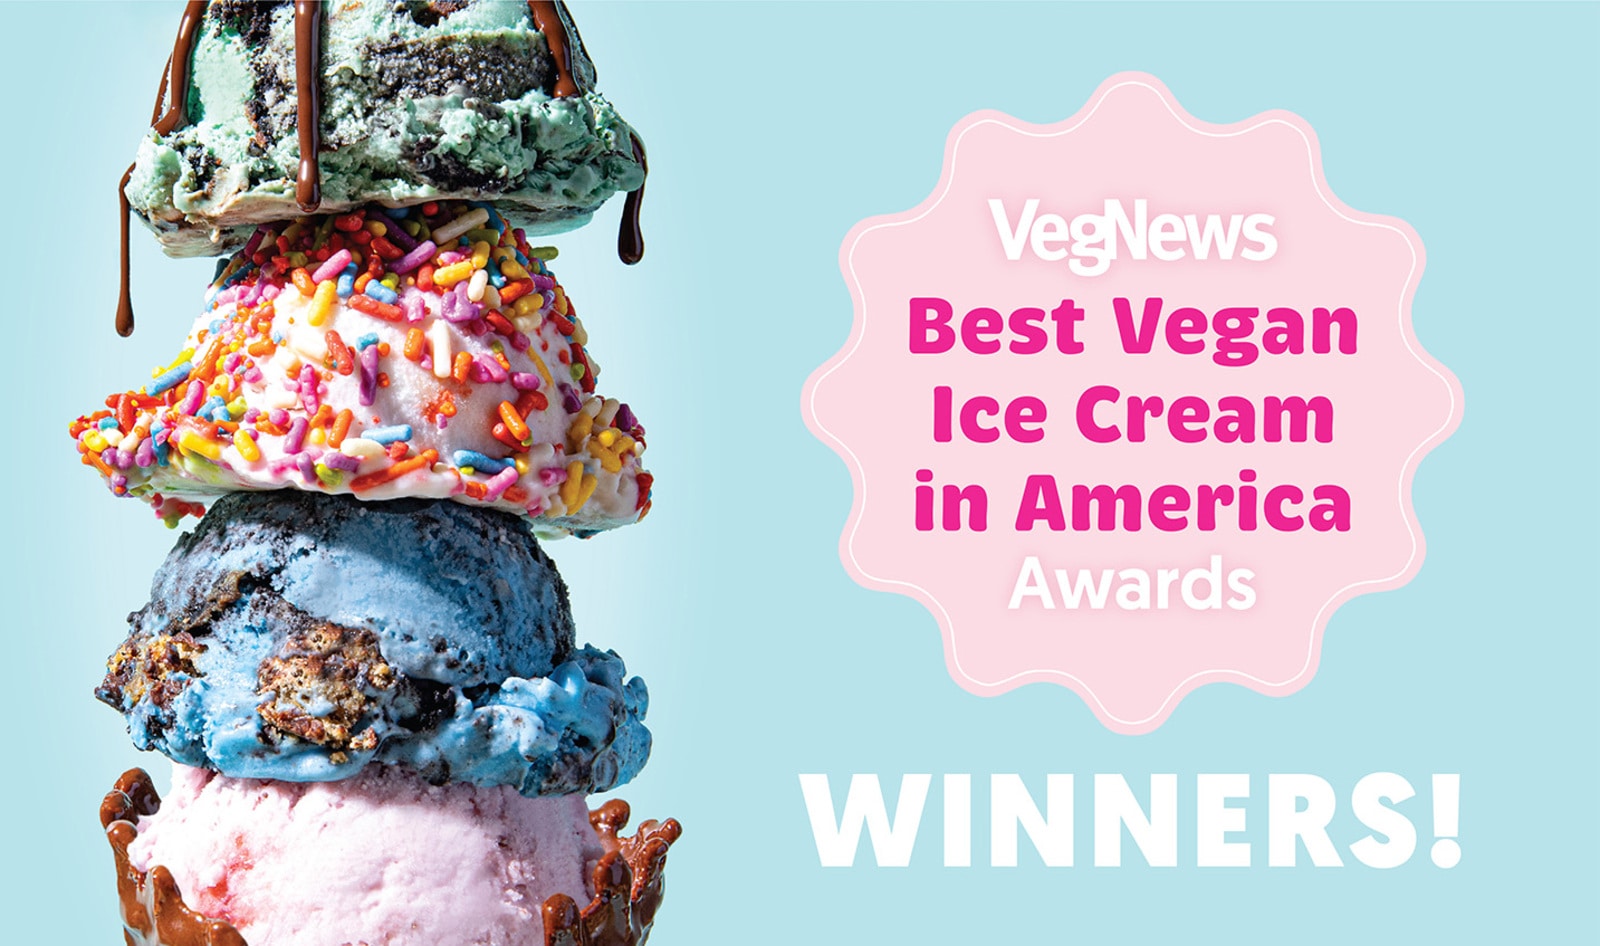 The Votes Are In. What is the Best Vegan Ice Cream in America?